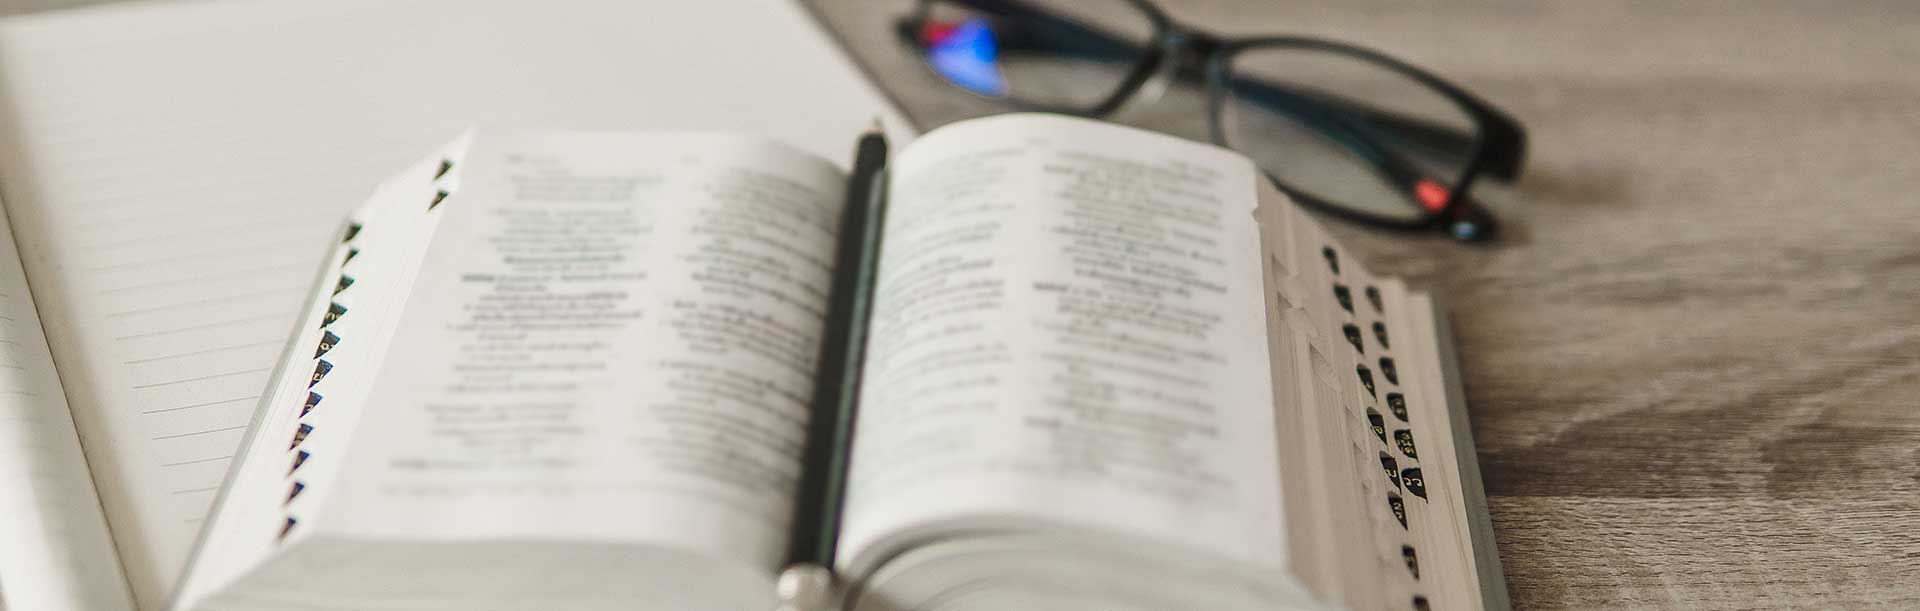 open bible on table with glasses